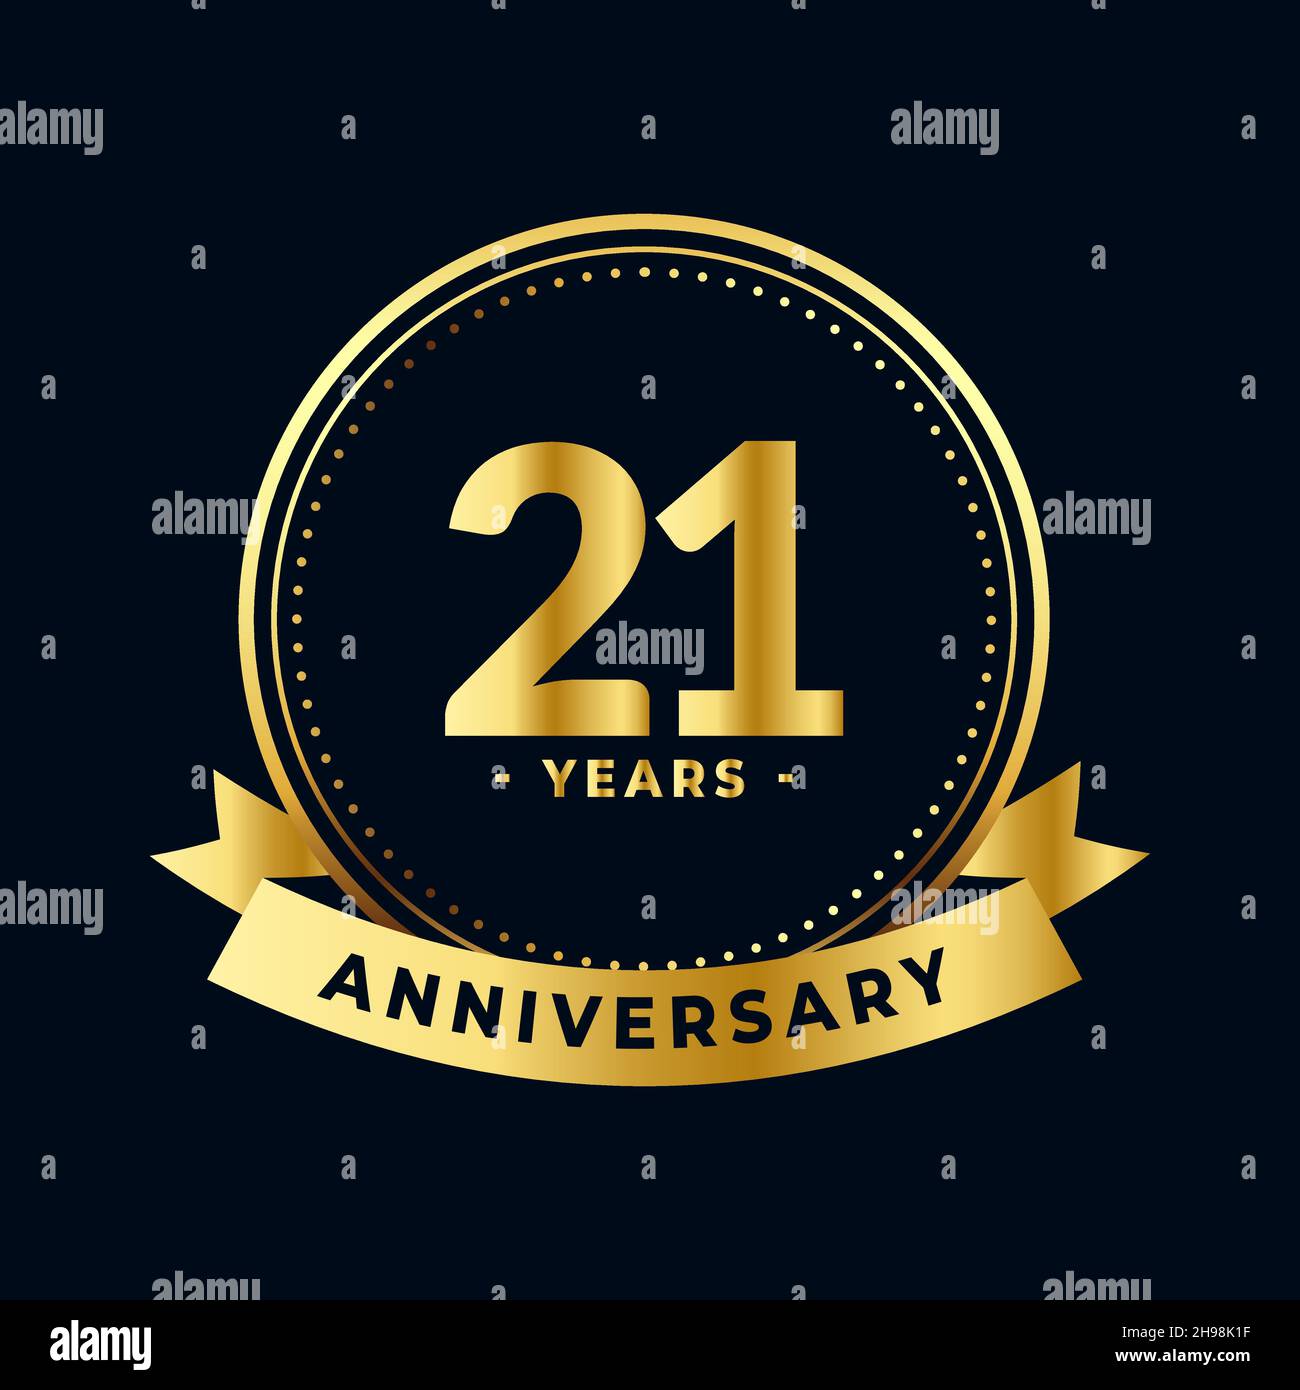 Twenty One Years Anniversary Gold and Black Isolated Vector Stock Vector